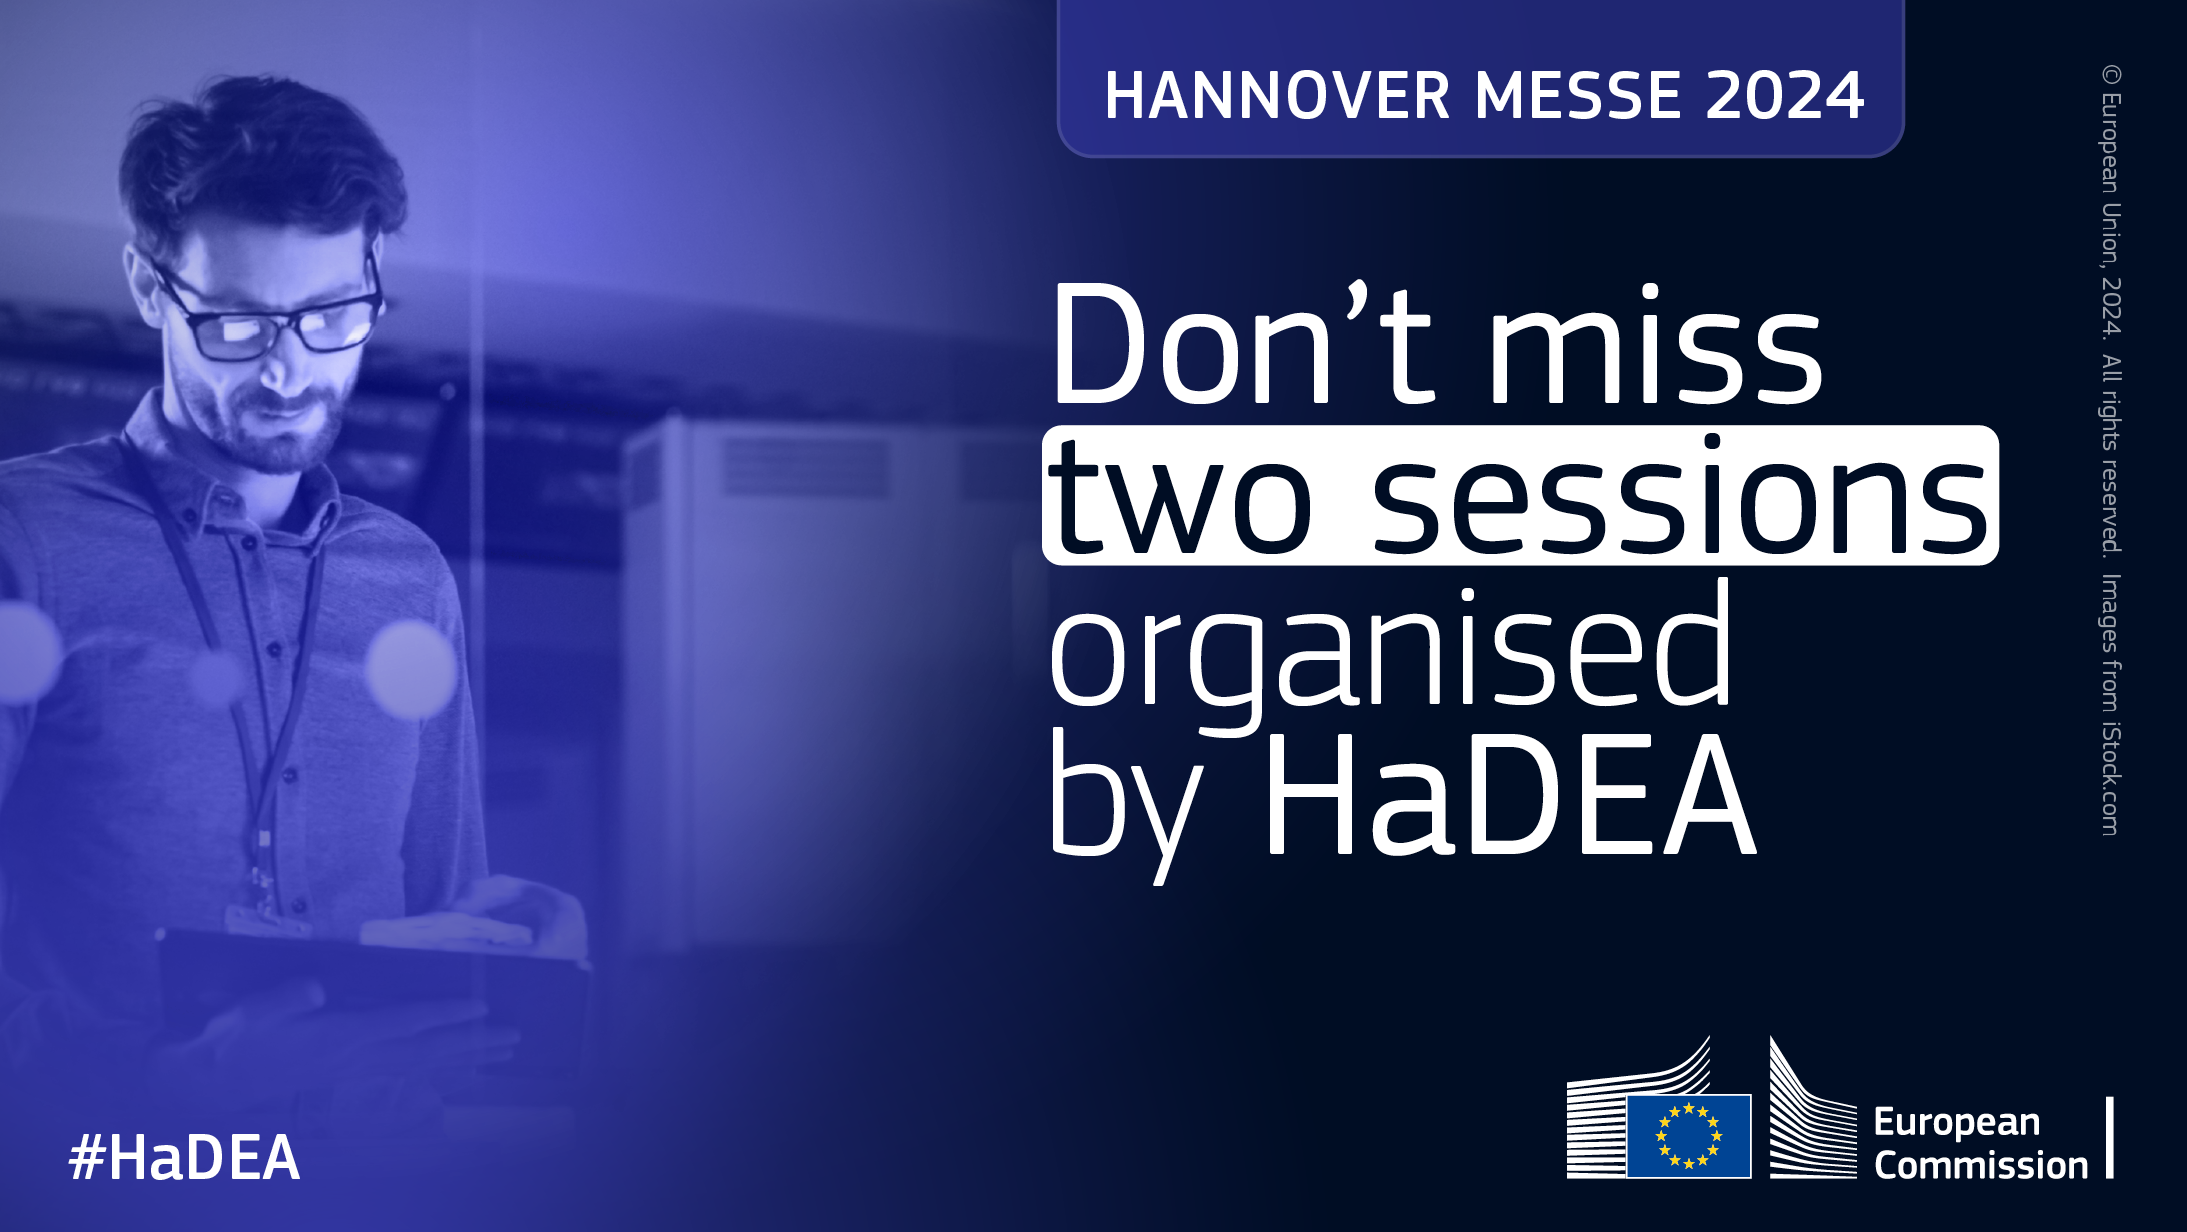 Black and blue dark background with a young man in the left working on a tablet. Text: Hannover Messe 2024. Don't miss two sessions organised by HaDEA.